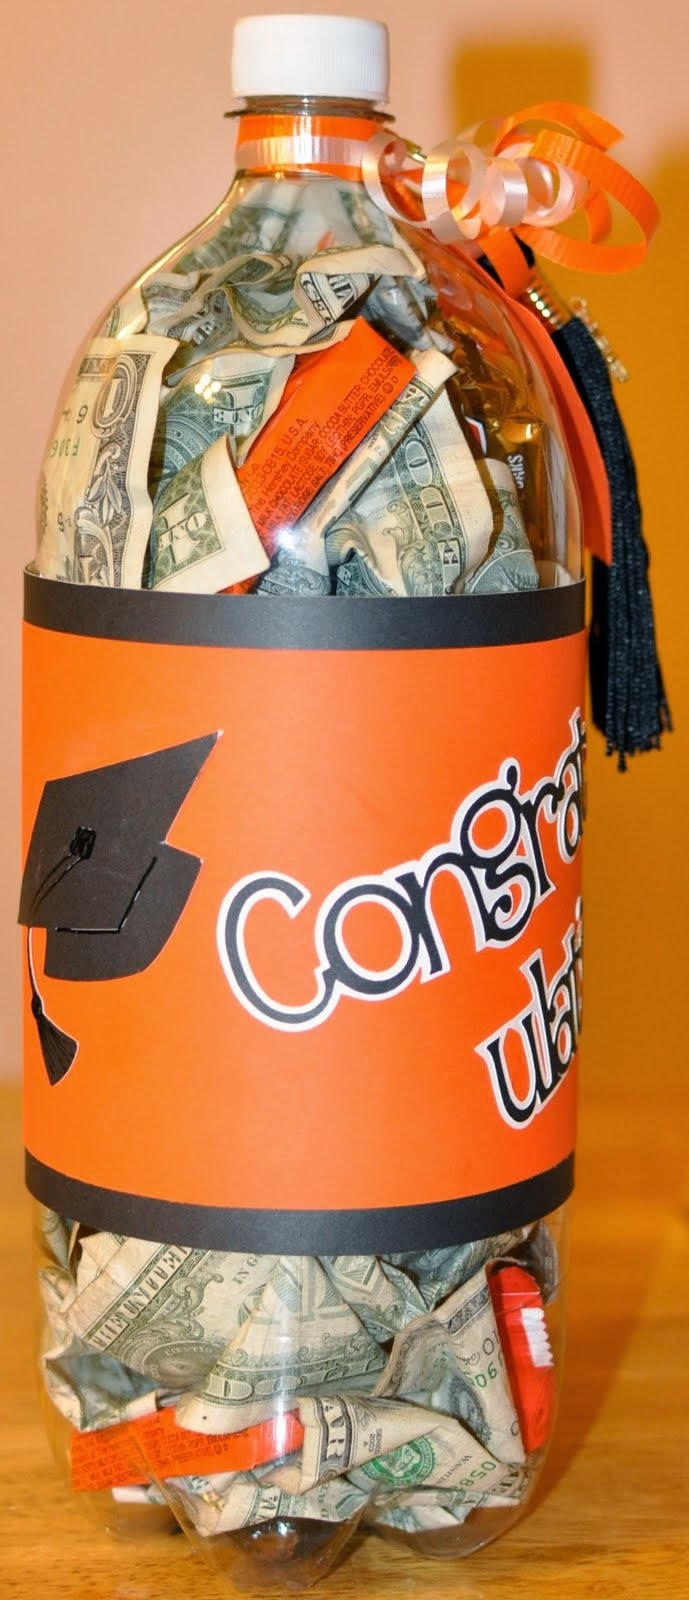 Money Gift Ideas For Graduation
 GIFTS THAT SAY WOW Fun Crafts and Gift Ideas Graduation